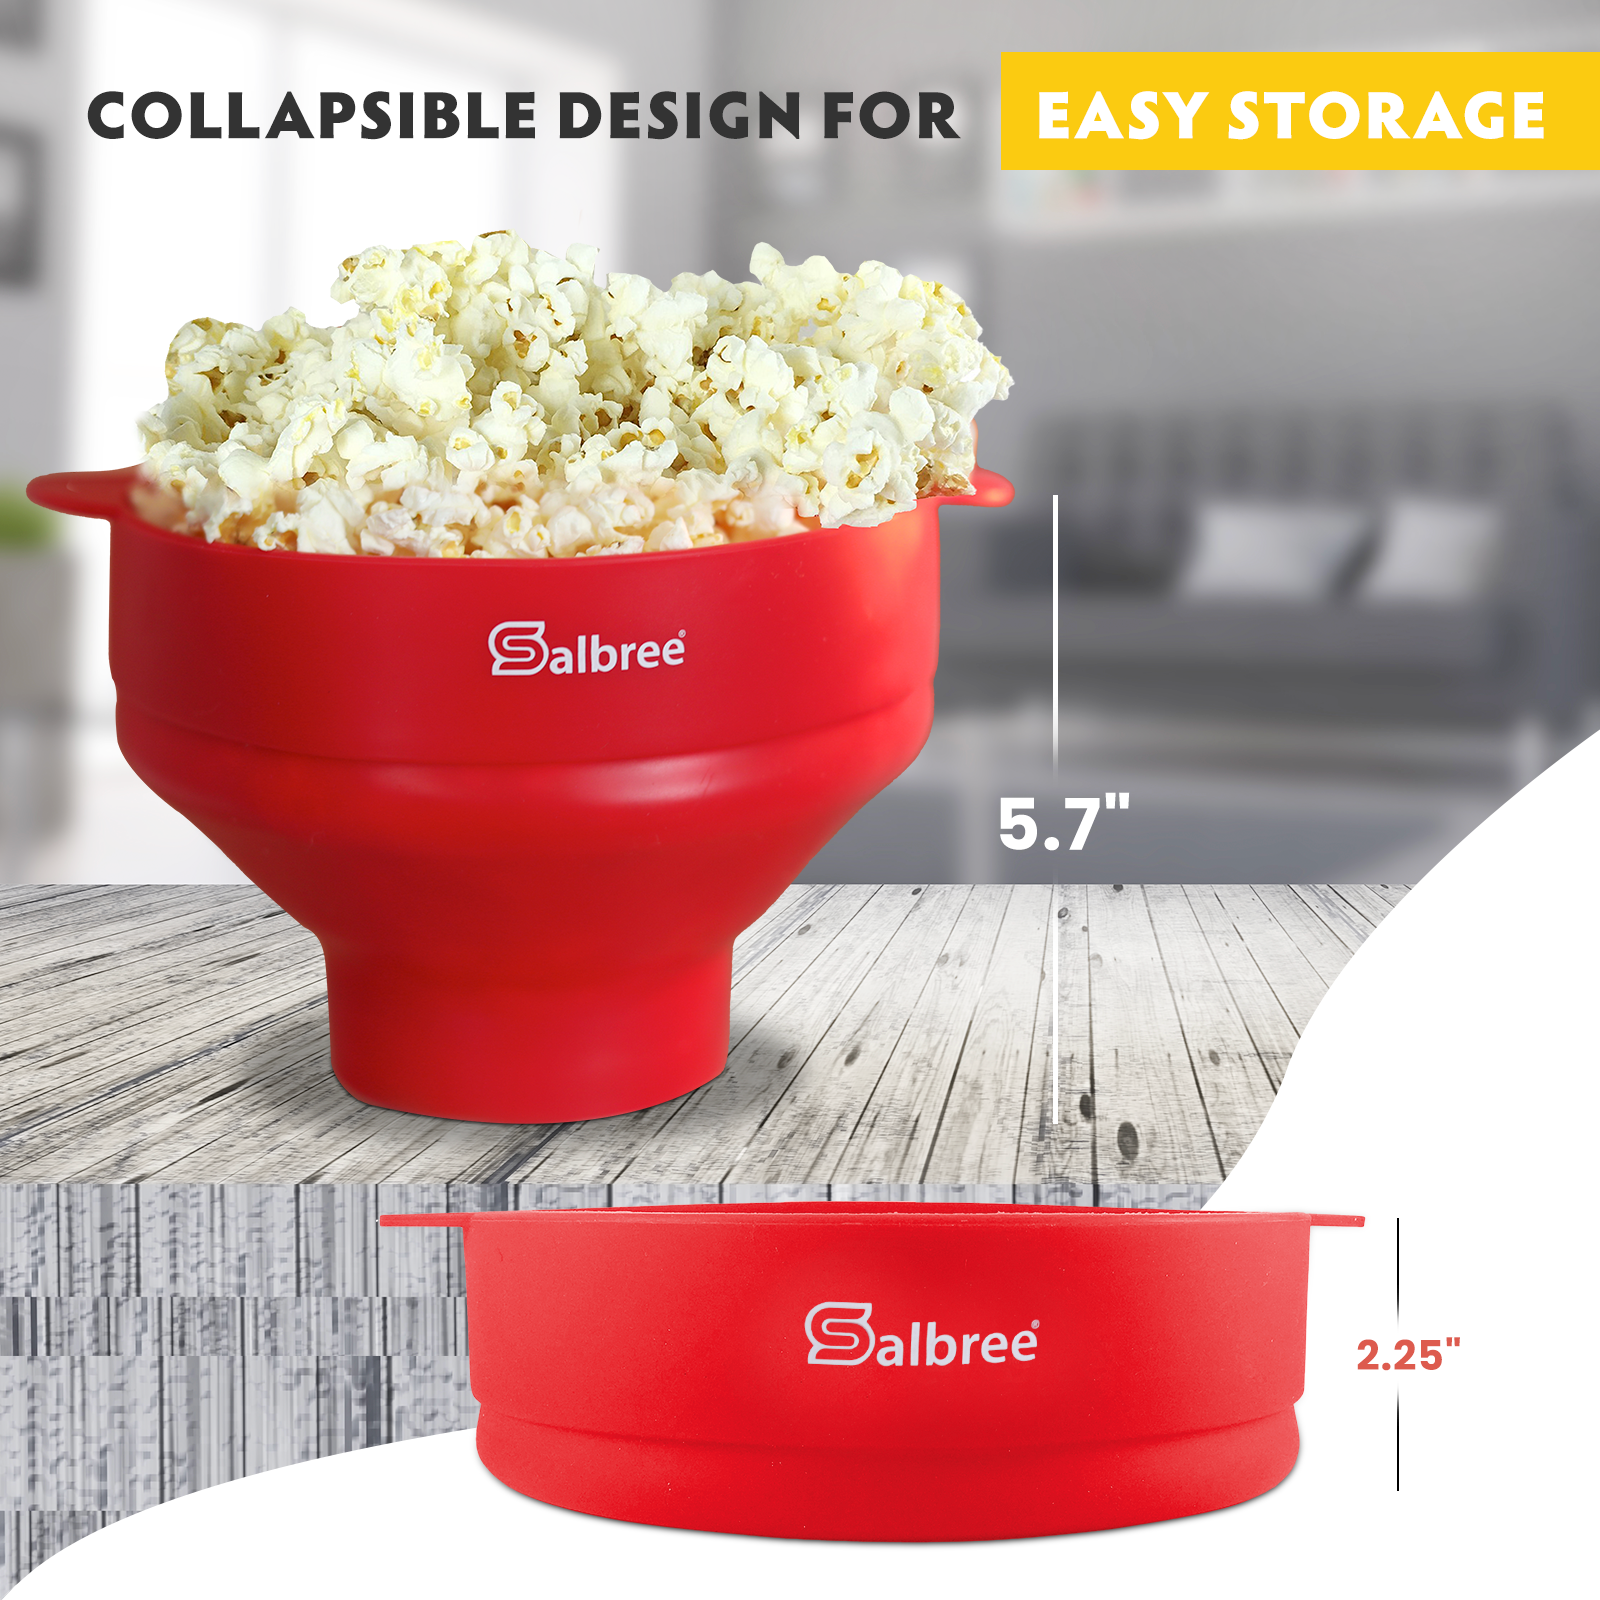 The Original Salbree Microwave Popcorn Popper, Silicone Popcorn Maker,  Collapsible Microwavable Bowl - Hot Air Popper - No Oil Required - The Most